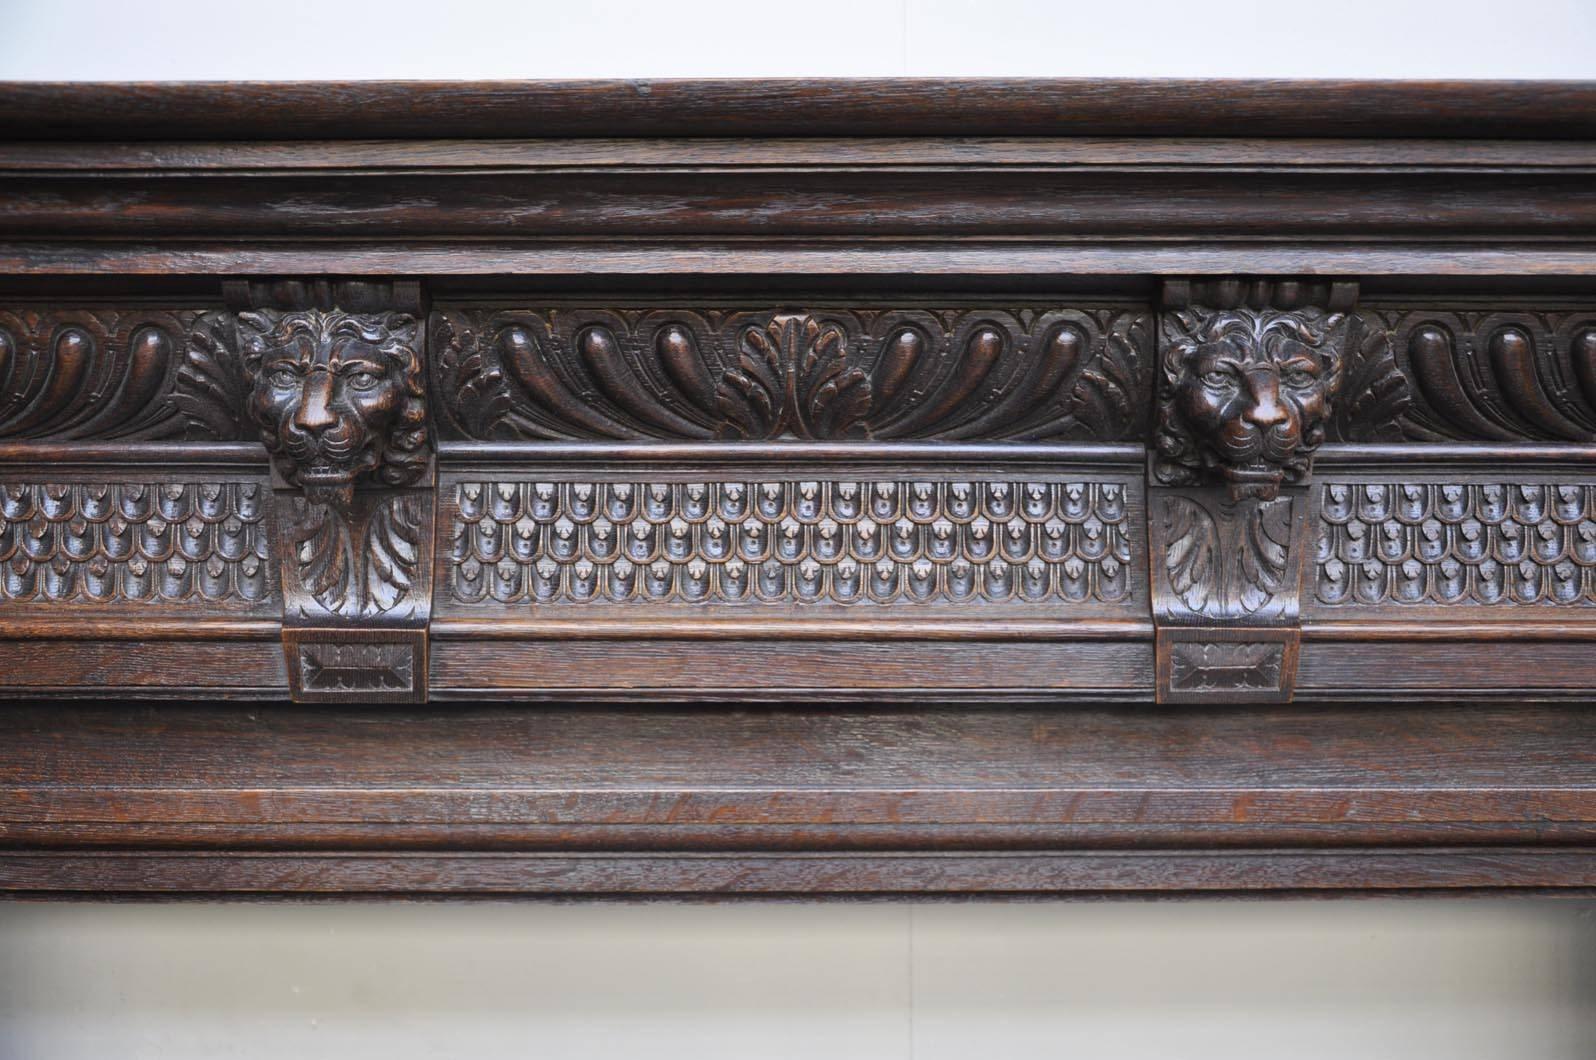 This fireplace is made out of oak, finely carved with a frieze of four lion's heads, godroons and acanthus leaves. We can see two fluted columns with a Corintian capital.